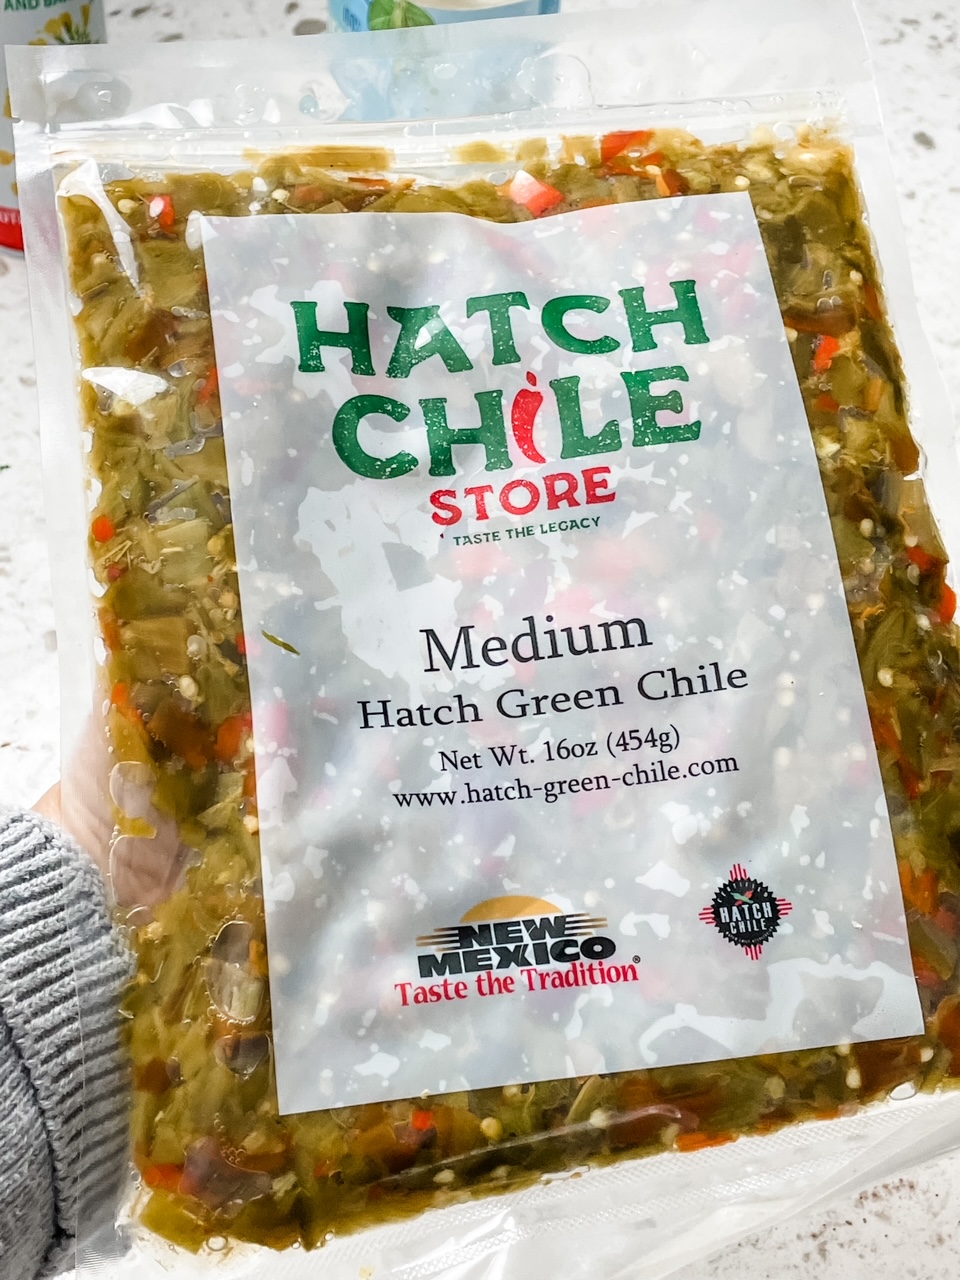 The bag of frozen hatch chiles